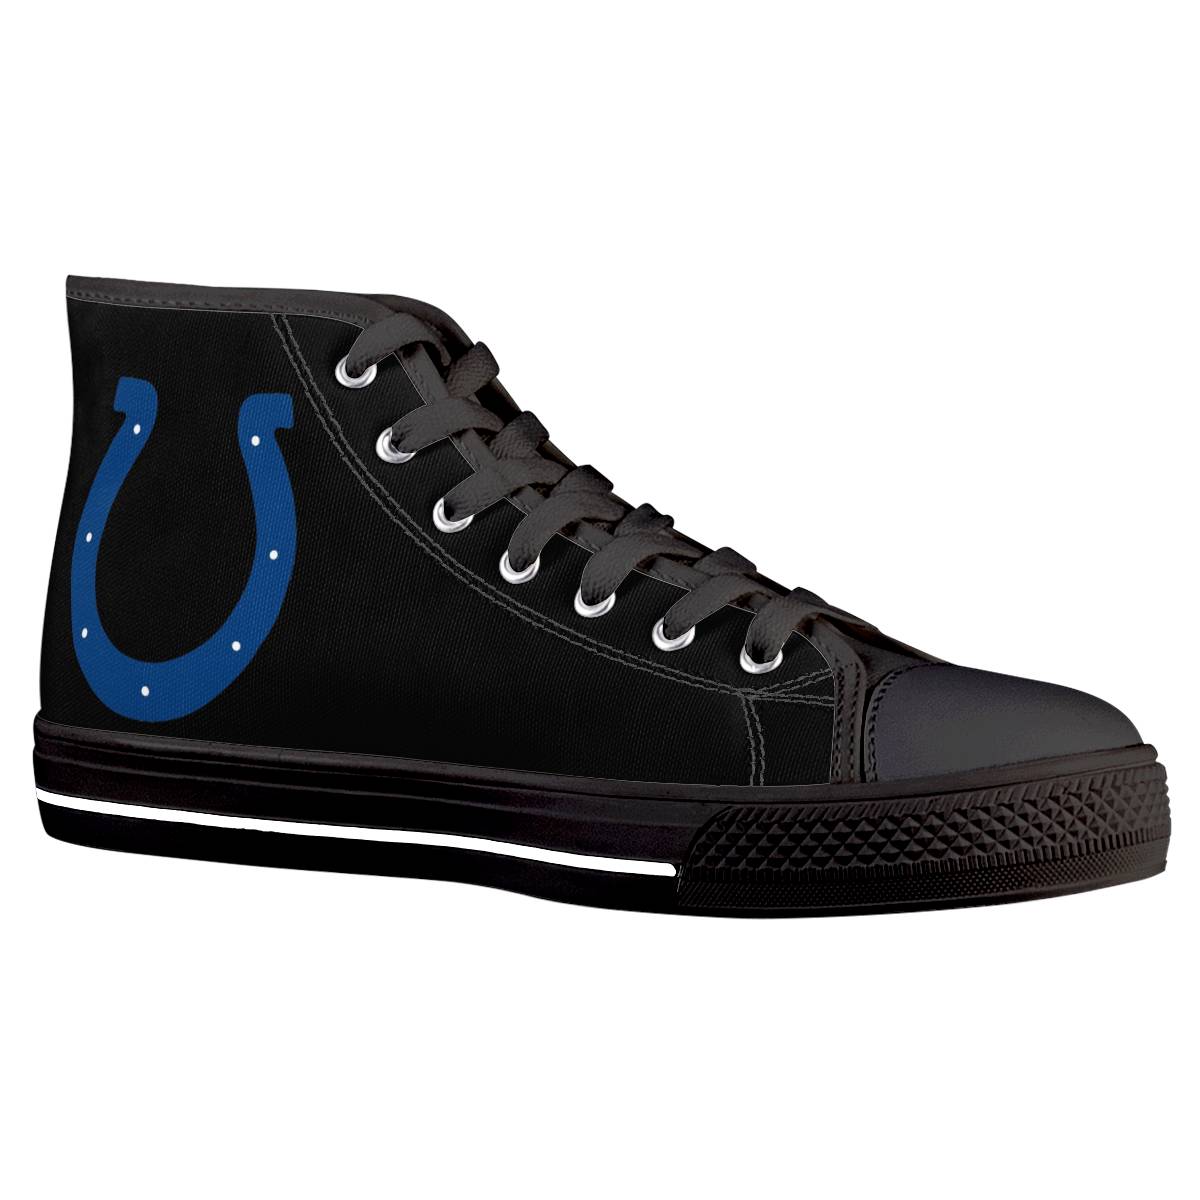 Men's Indianapolis Colts High Top Canvas Sneakers 002